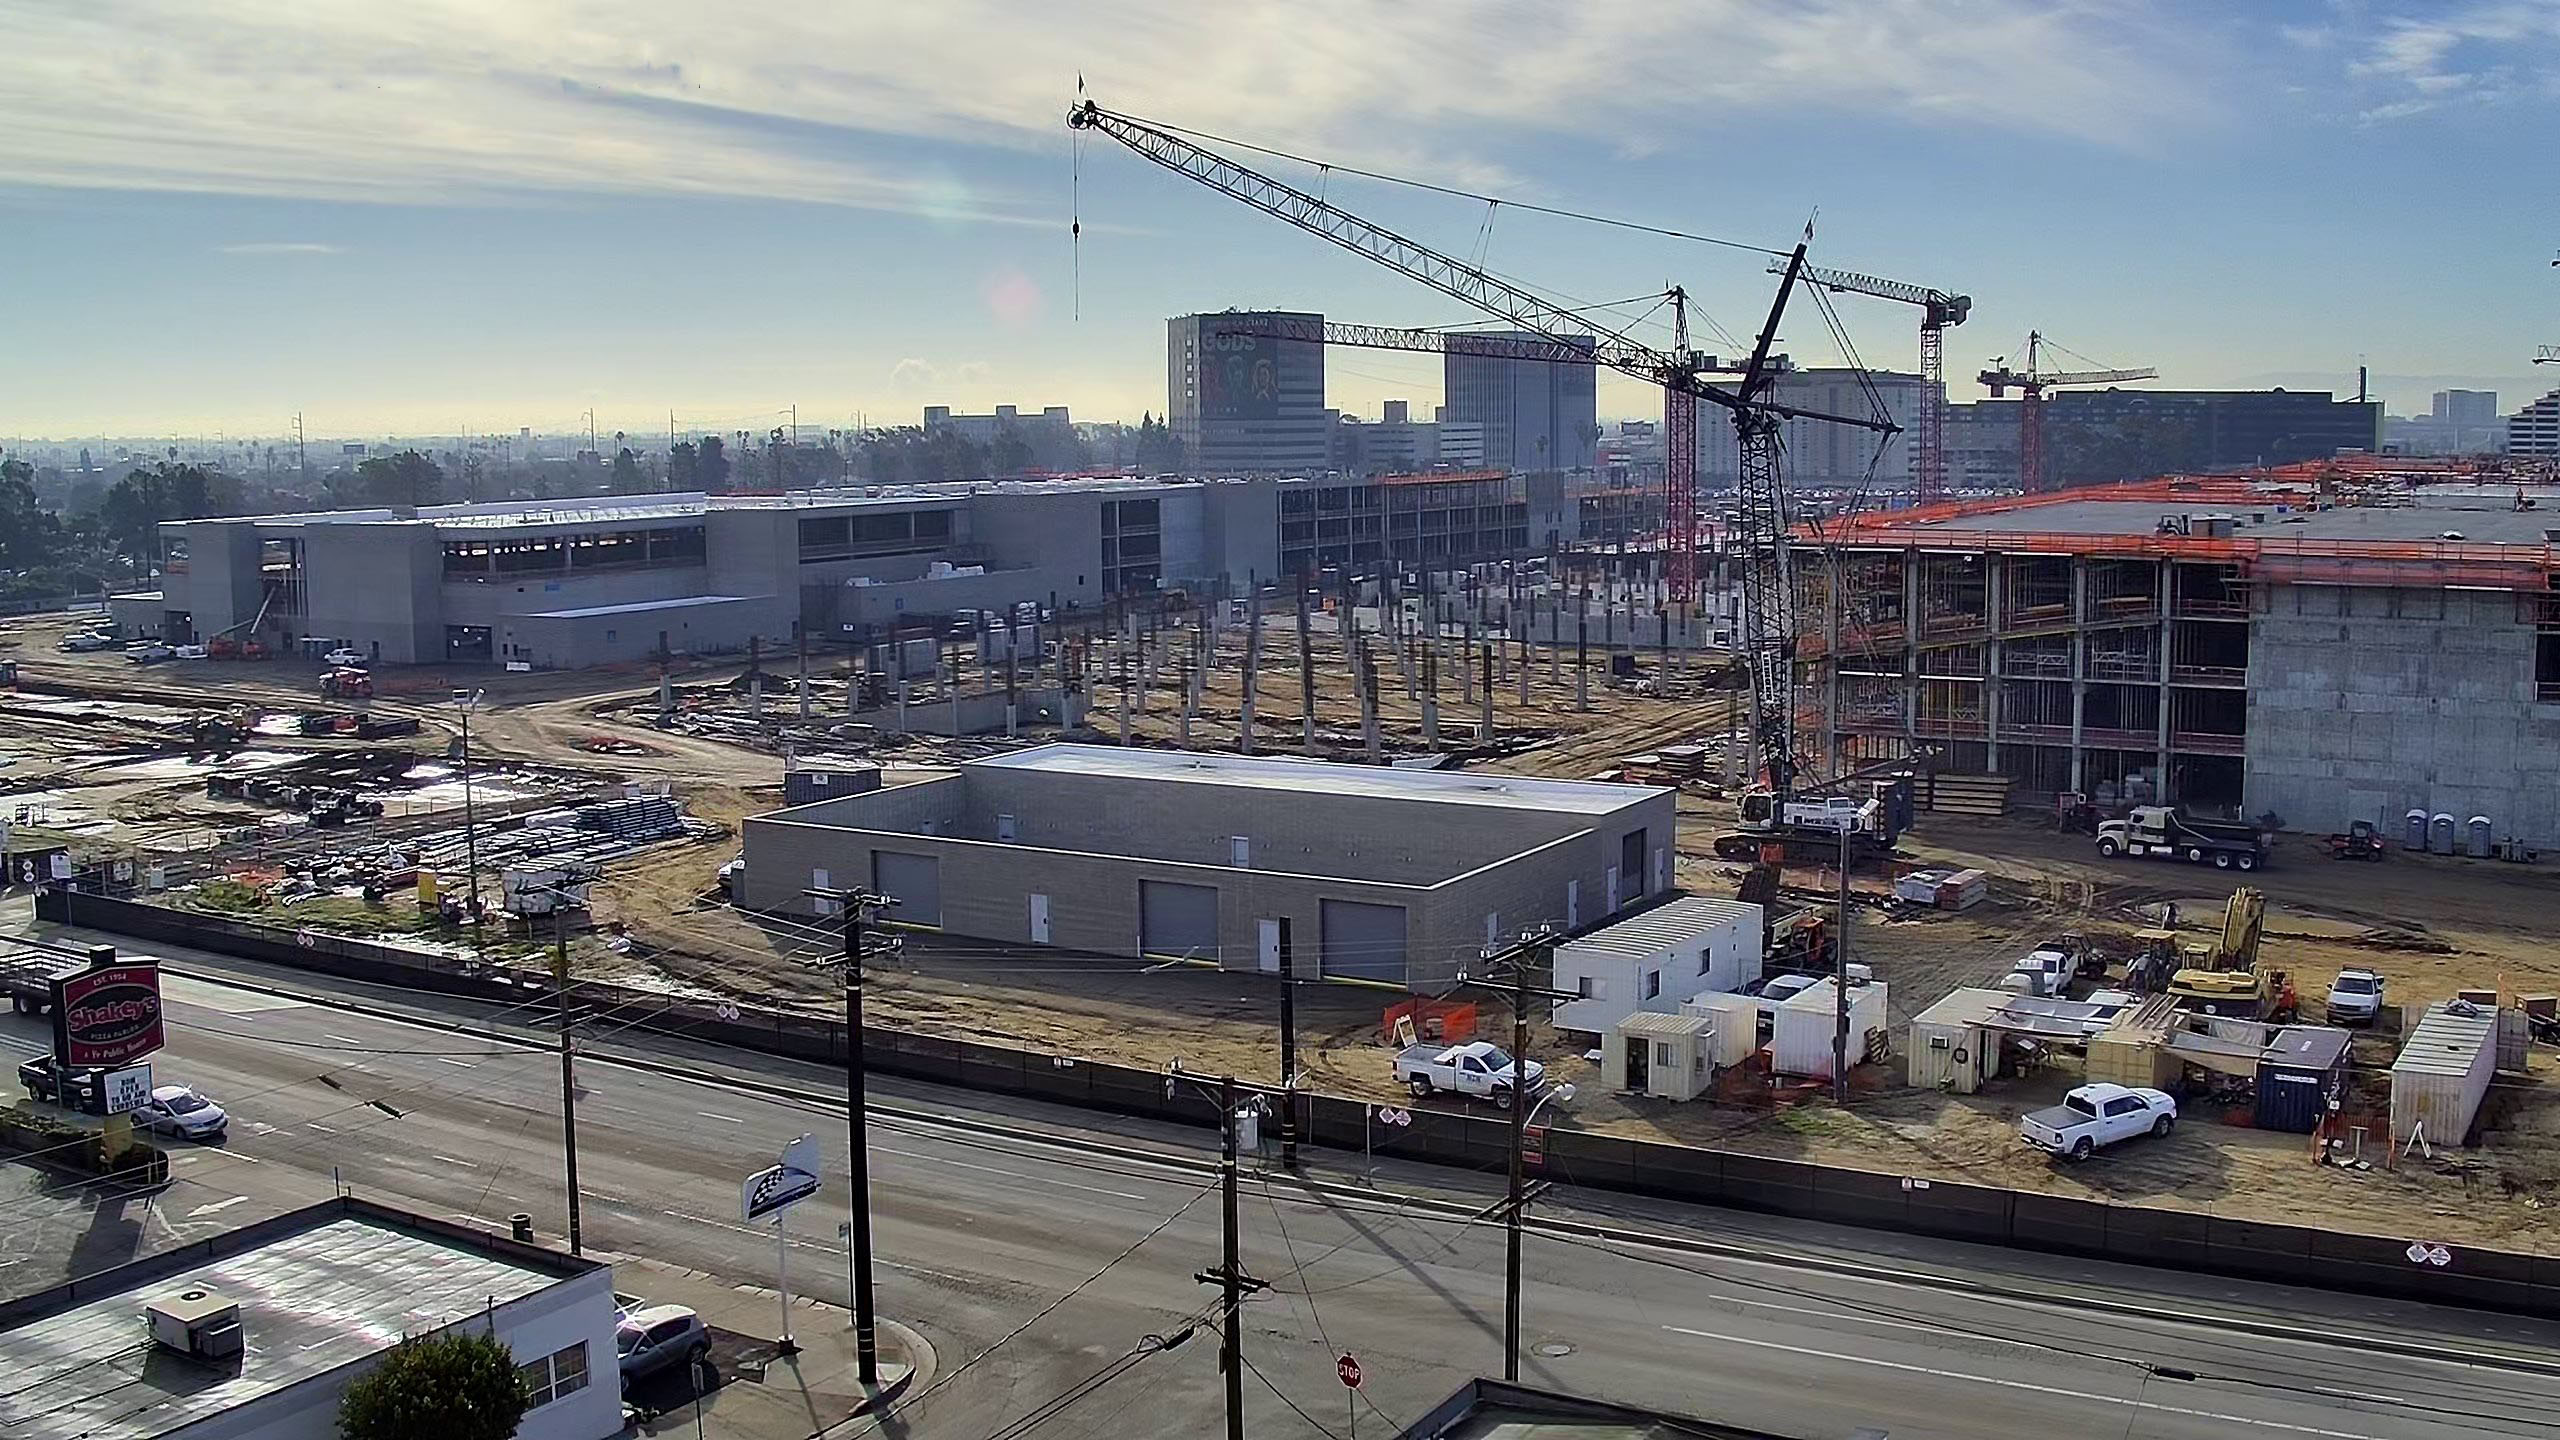 North view of the Consolidated Rent-A-Car (ConRAC) facility construction site.